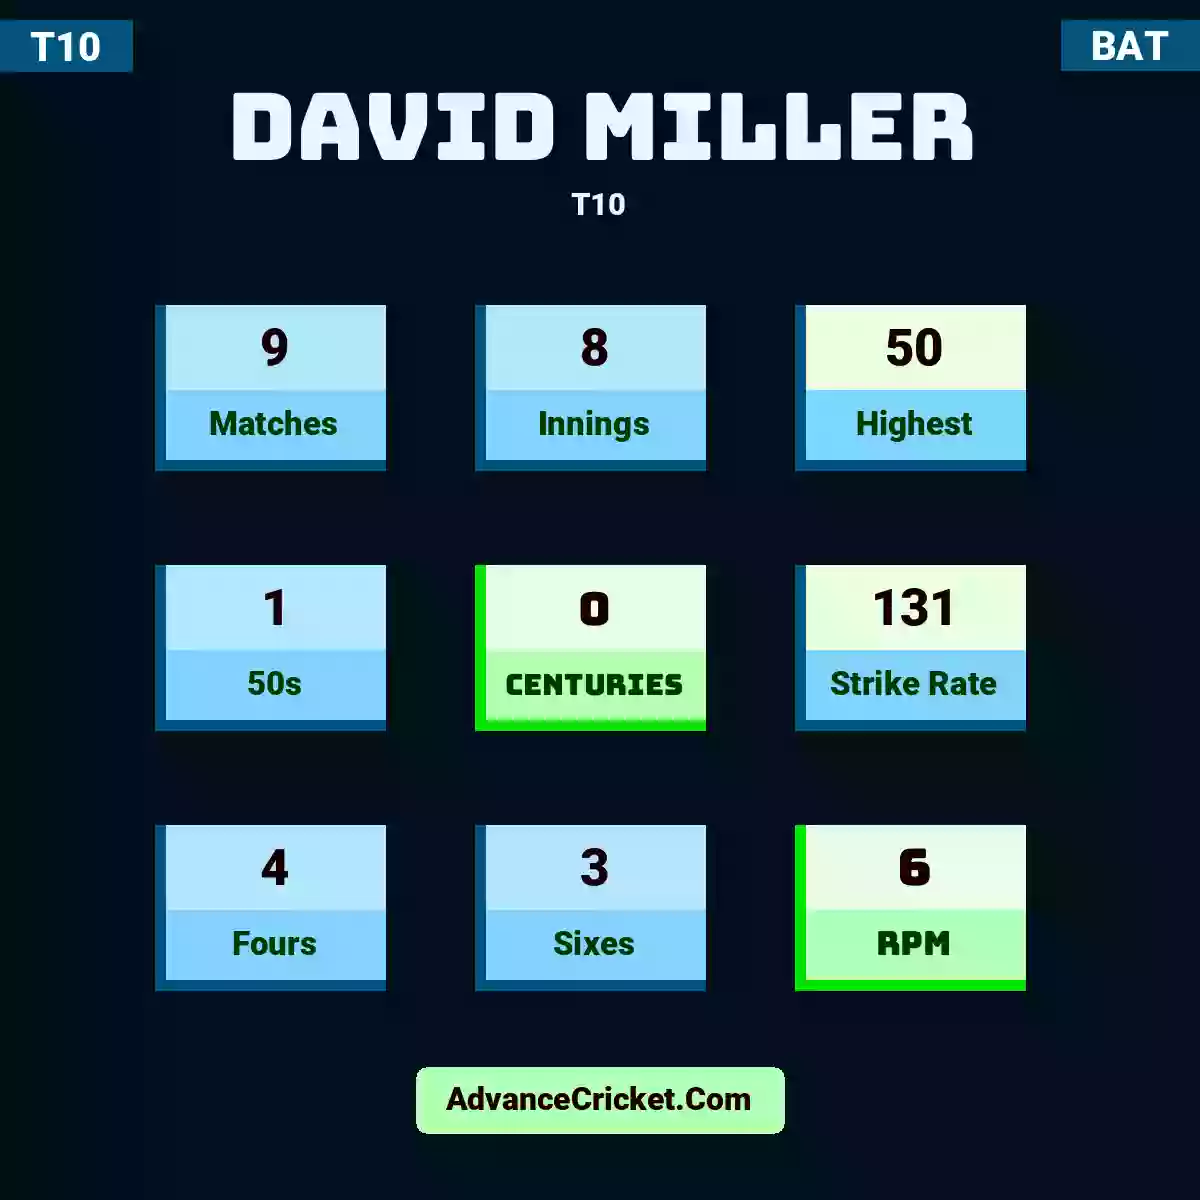 David Miller T10 , David Miller played 9 matches, scored 50 runs as highest, 1 half-centuries, and 0 centuries, with a strike rate of 131. D.Miller hit 4 fours and 3 sixes, with an RPM of 6.